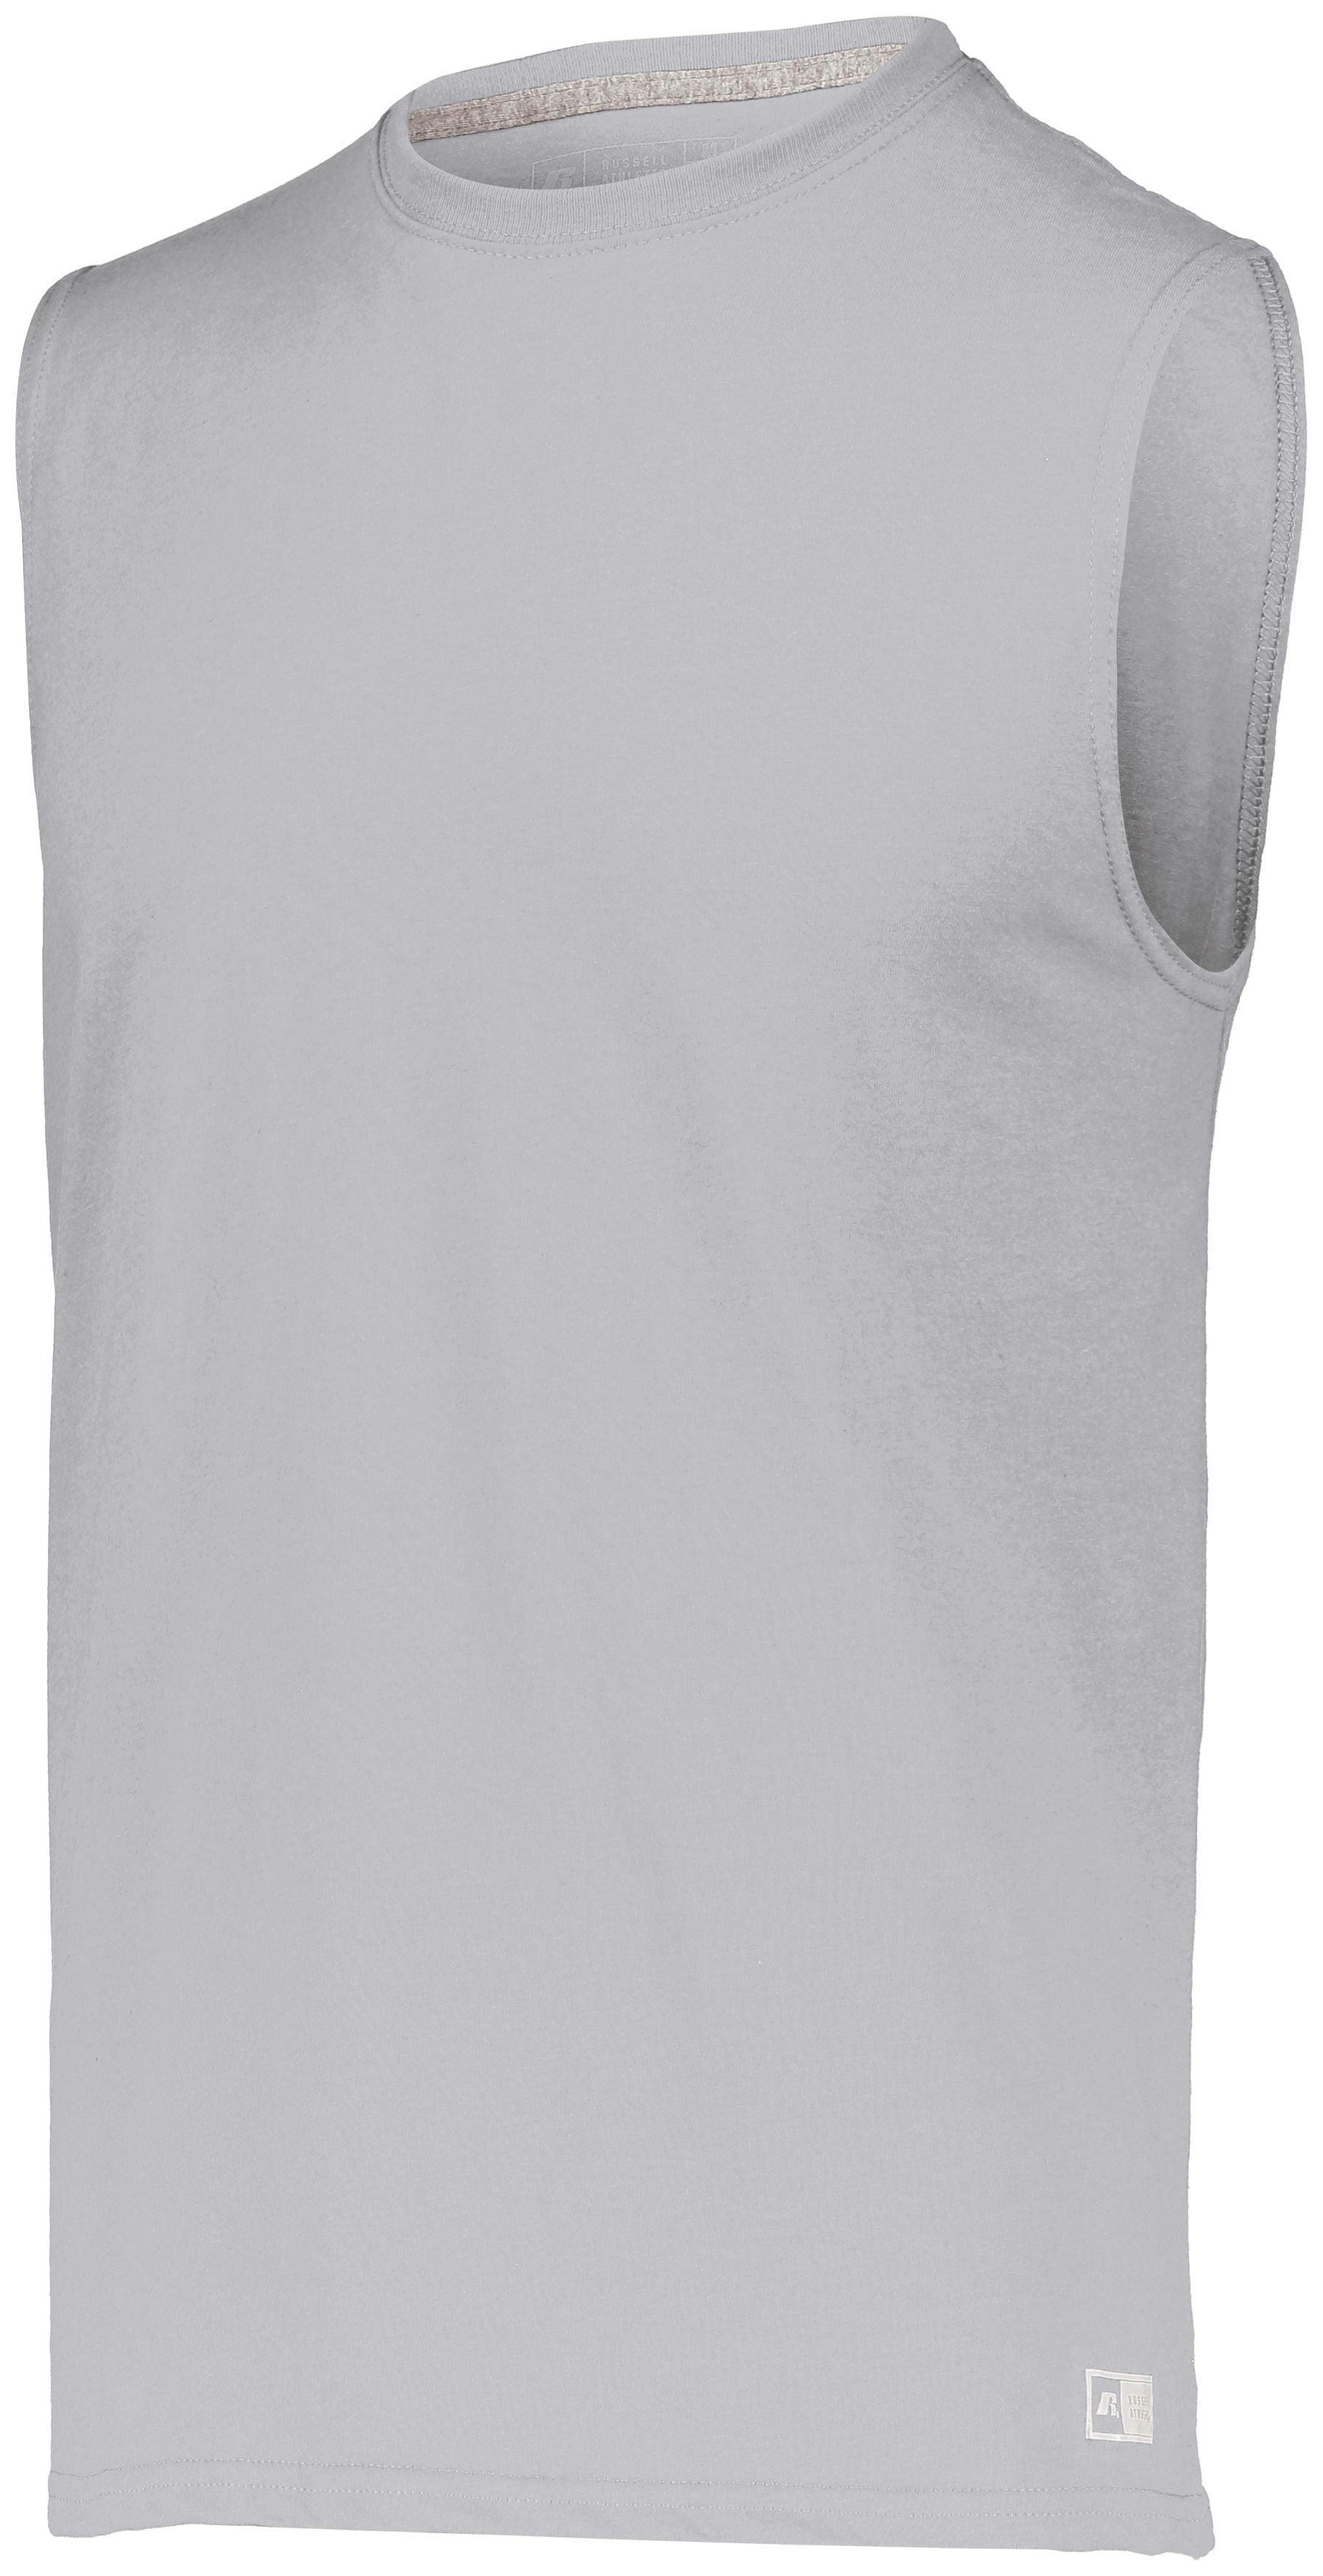 Russell Athletic Essential Muscle Tee in Oxford  -Part of the Adult, Adult-Tee-Shirt, T-Shirts, Russell-Athletic-Products, Shirts product lines at KanaleyCreations.com